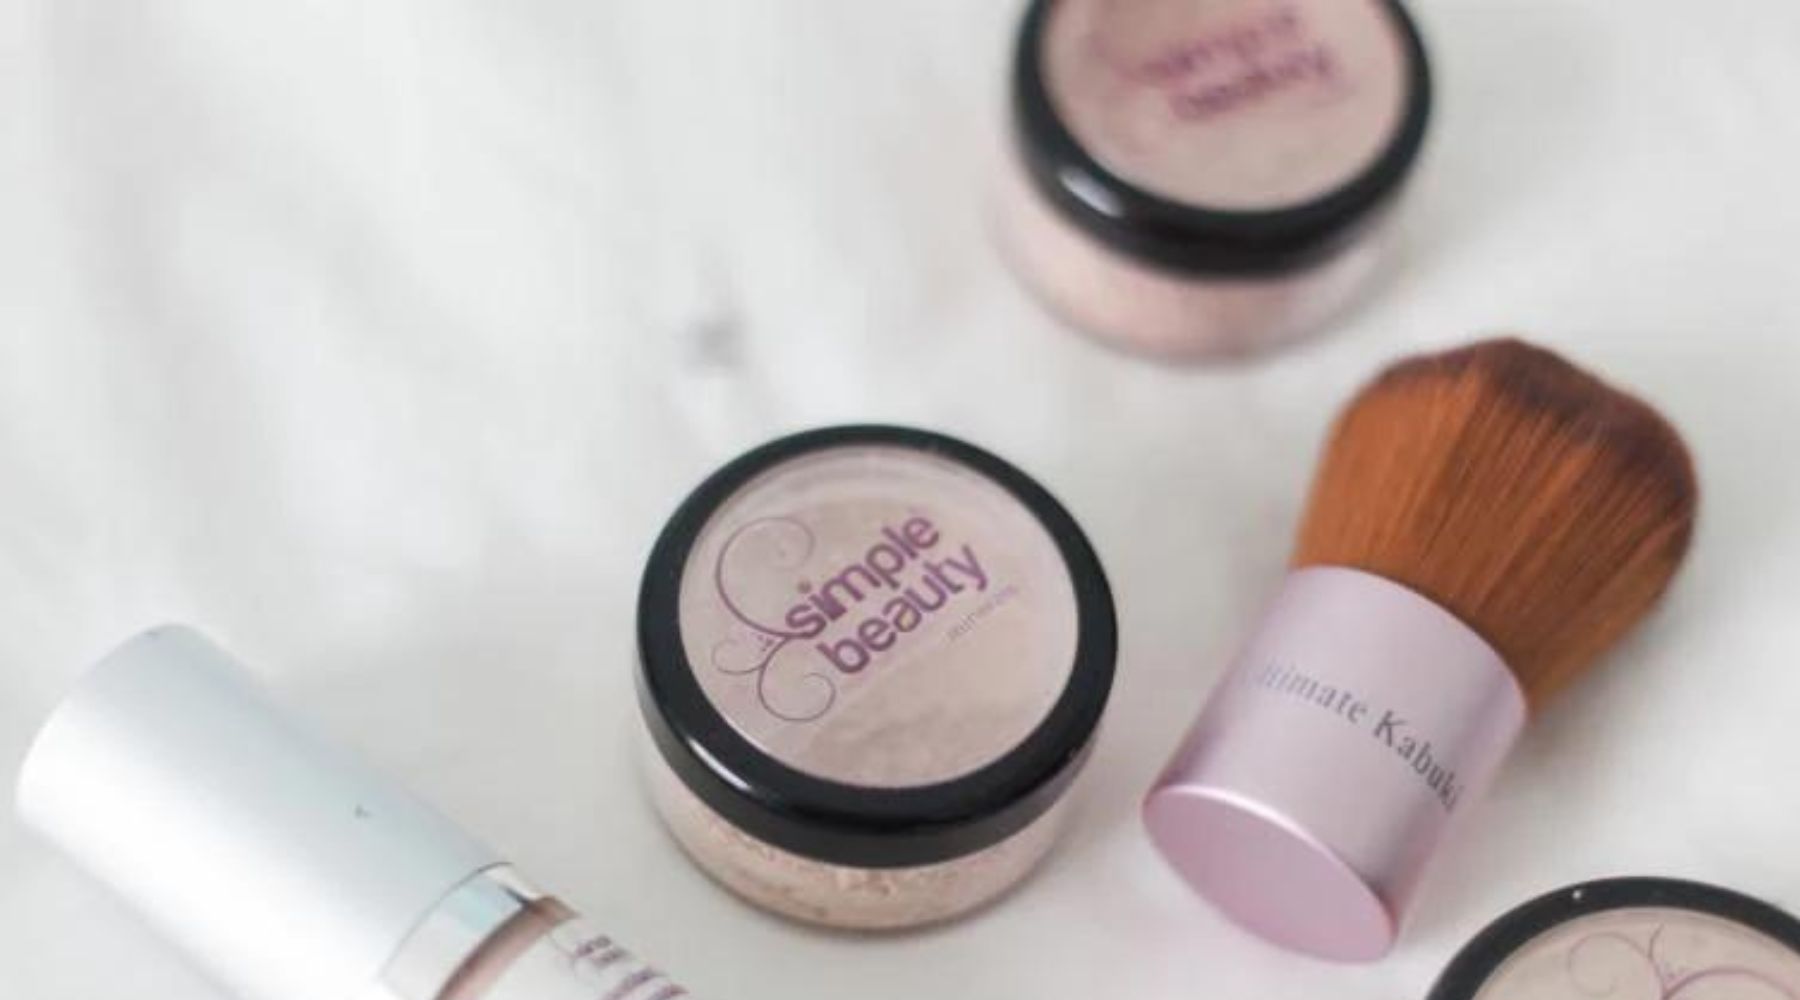 jars of mineral foundation and brush.